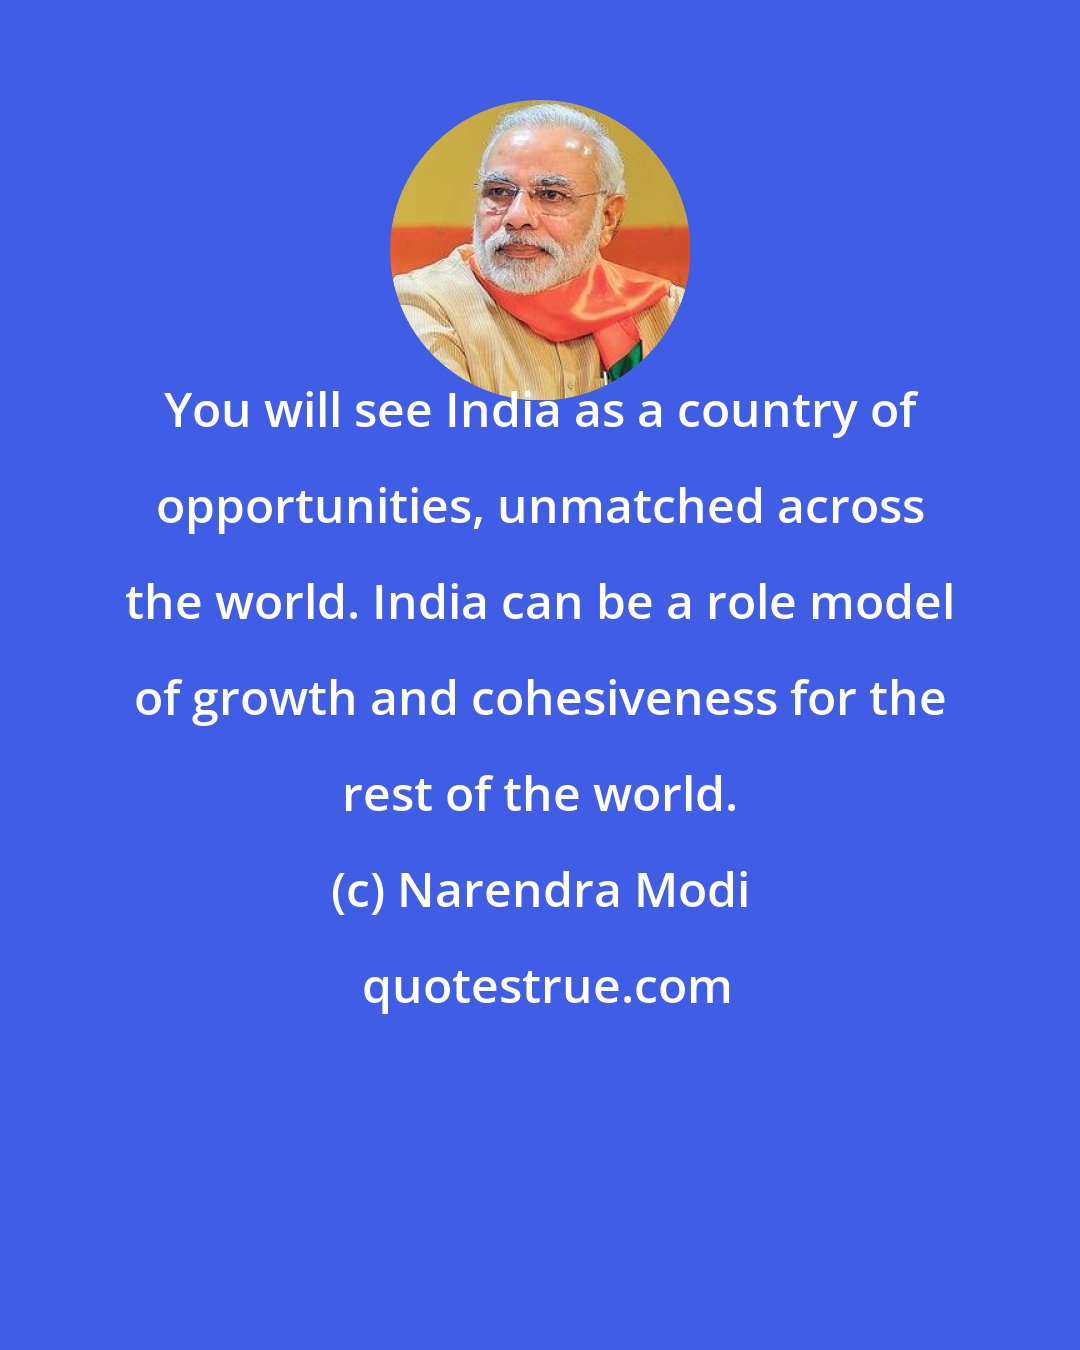 Narendra Modi: You will see India as a country of opportunities, unmatched across the world. India can be a role model of growth and cohesiveness for the rest of the world.